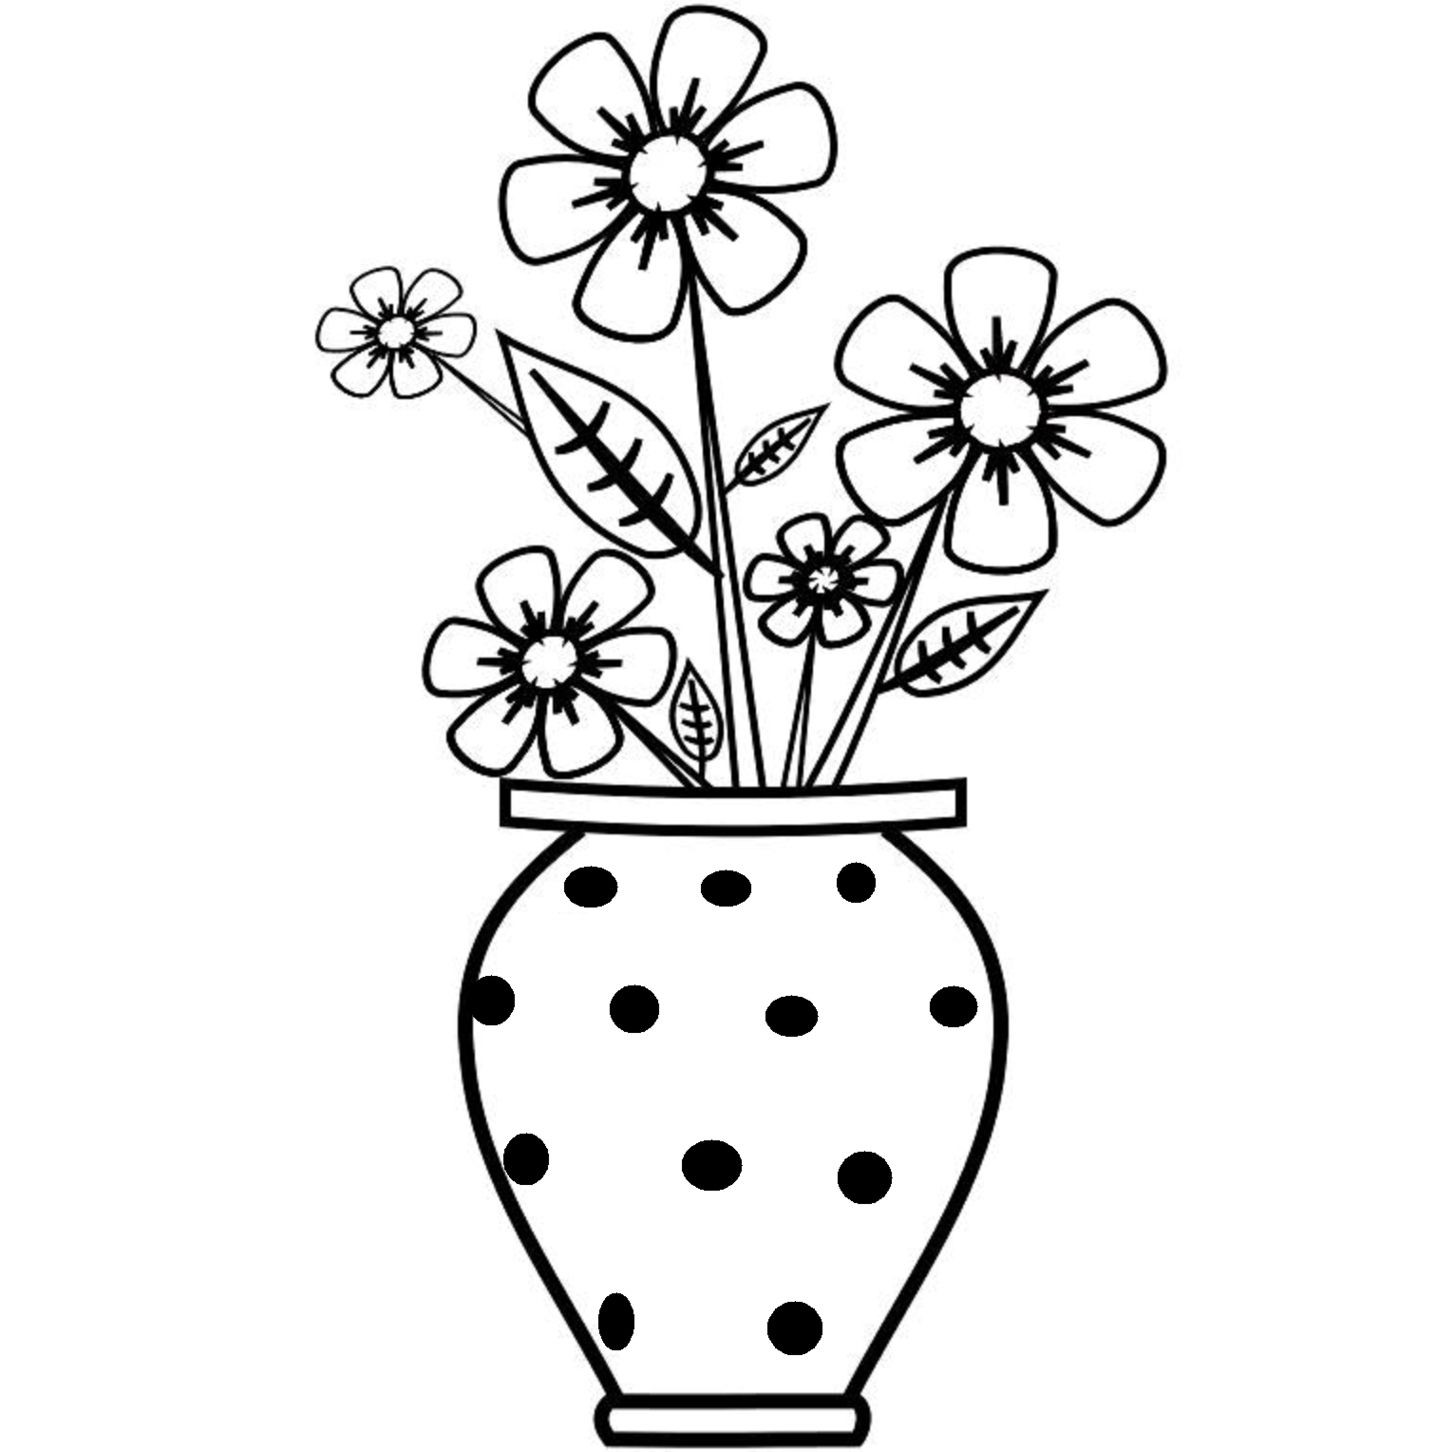 10 Lovely Church Flower Vases 2024 free download church flower vases of giant glass vase awesome 28 collection of vase drawing for kids with giant glass vase awesome 28 collection of vase drawing for kids